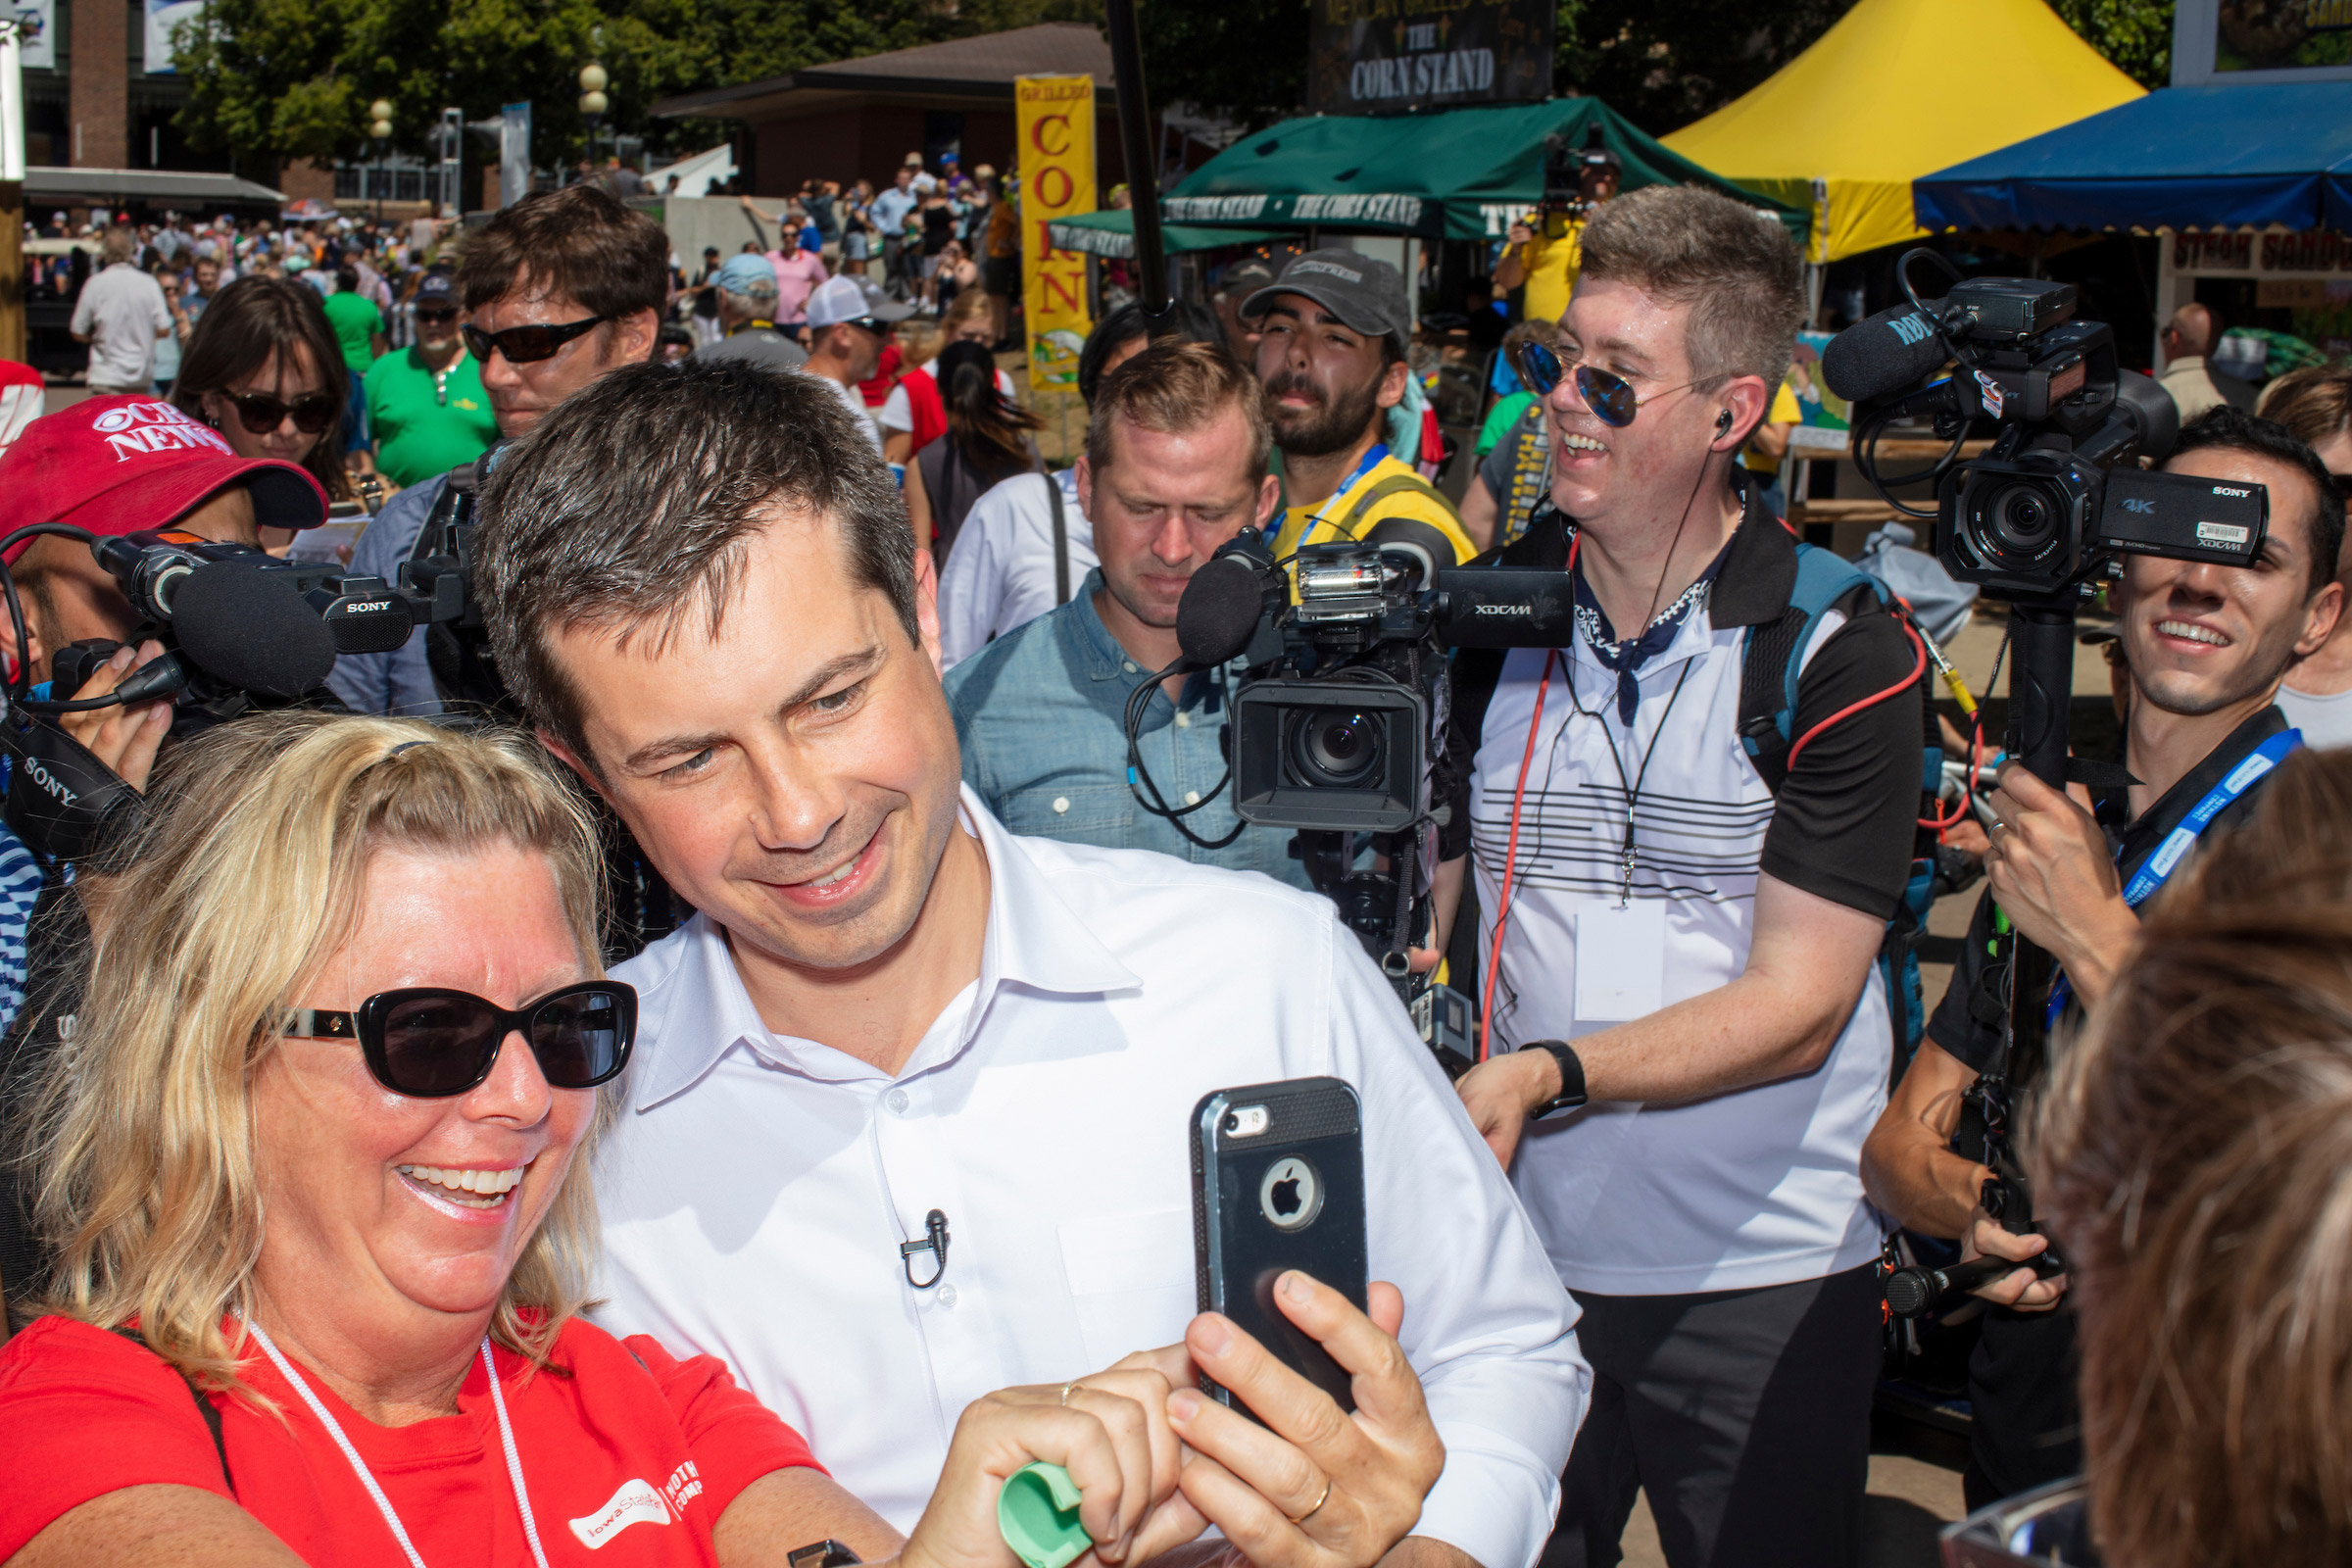 South Bend mayor and Democratic presidential candidate Pete Buttigieg greets people as he walks through the Iowa State Fair on Aug. 13. (M. Scott Brauer for TIME)